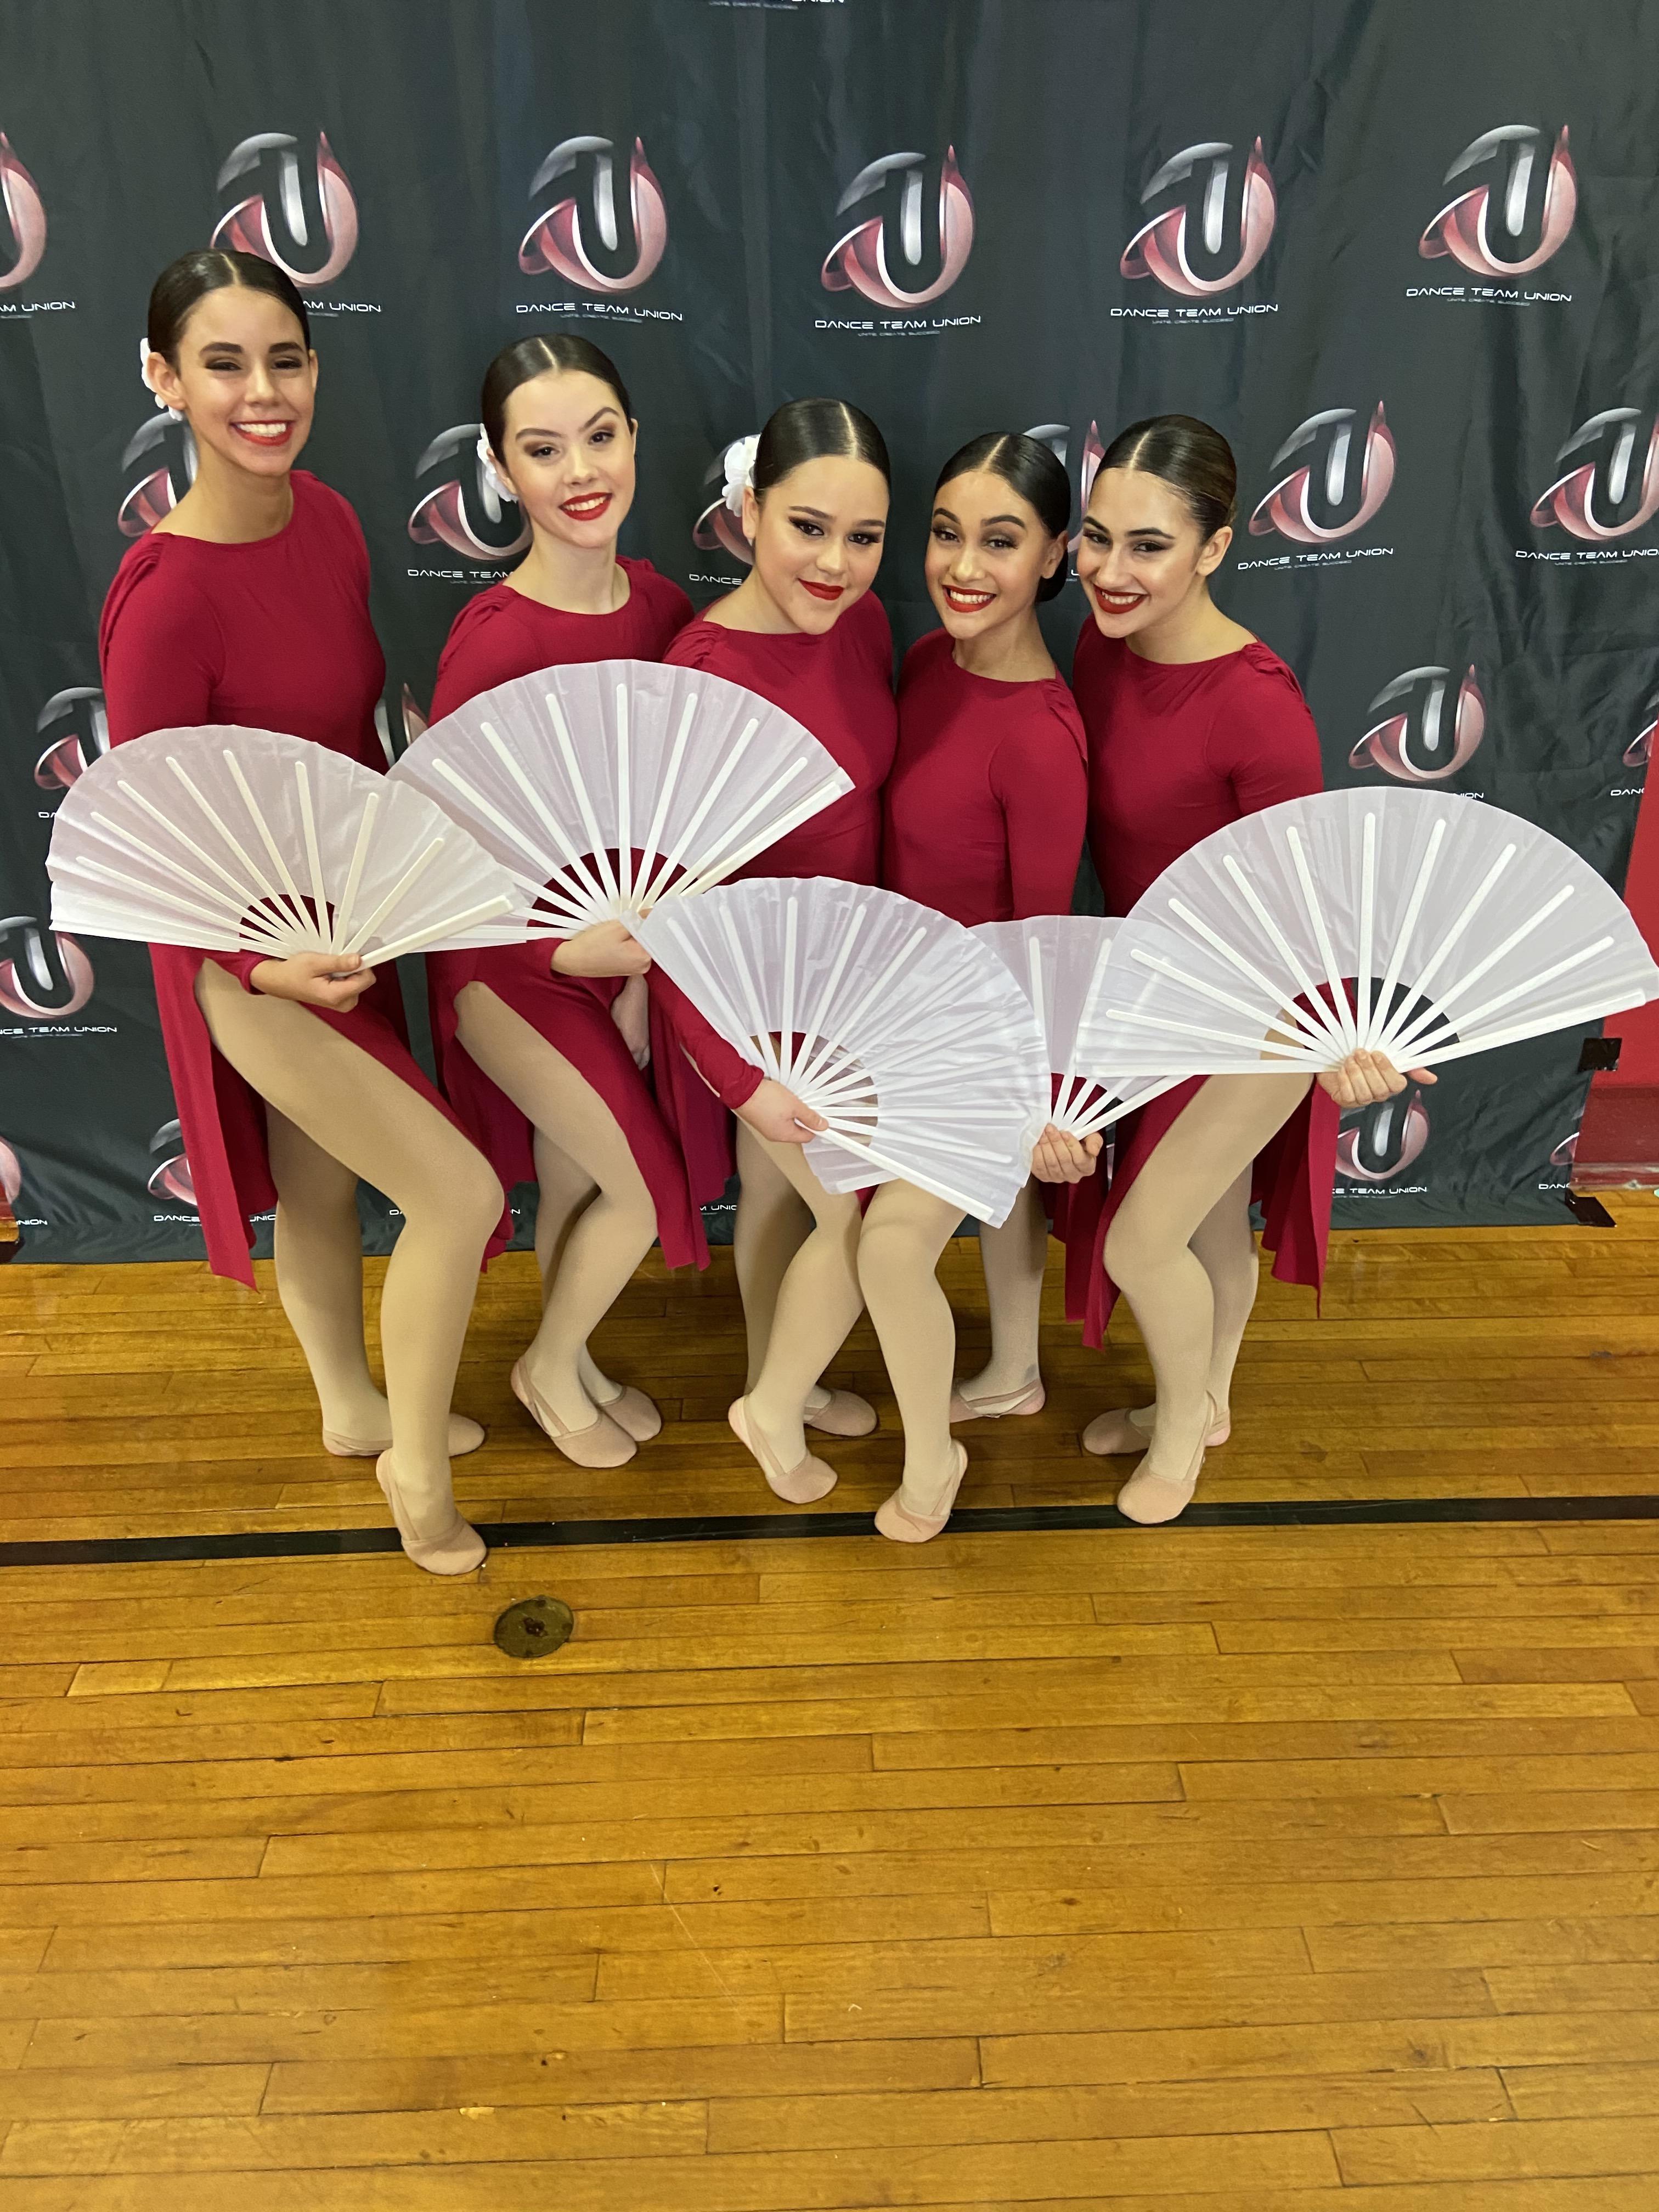 drillettes dance team in flamenco inspired costumes